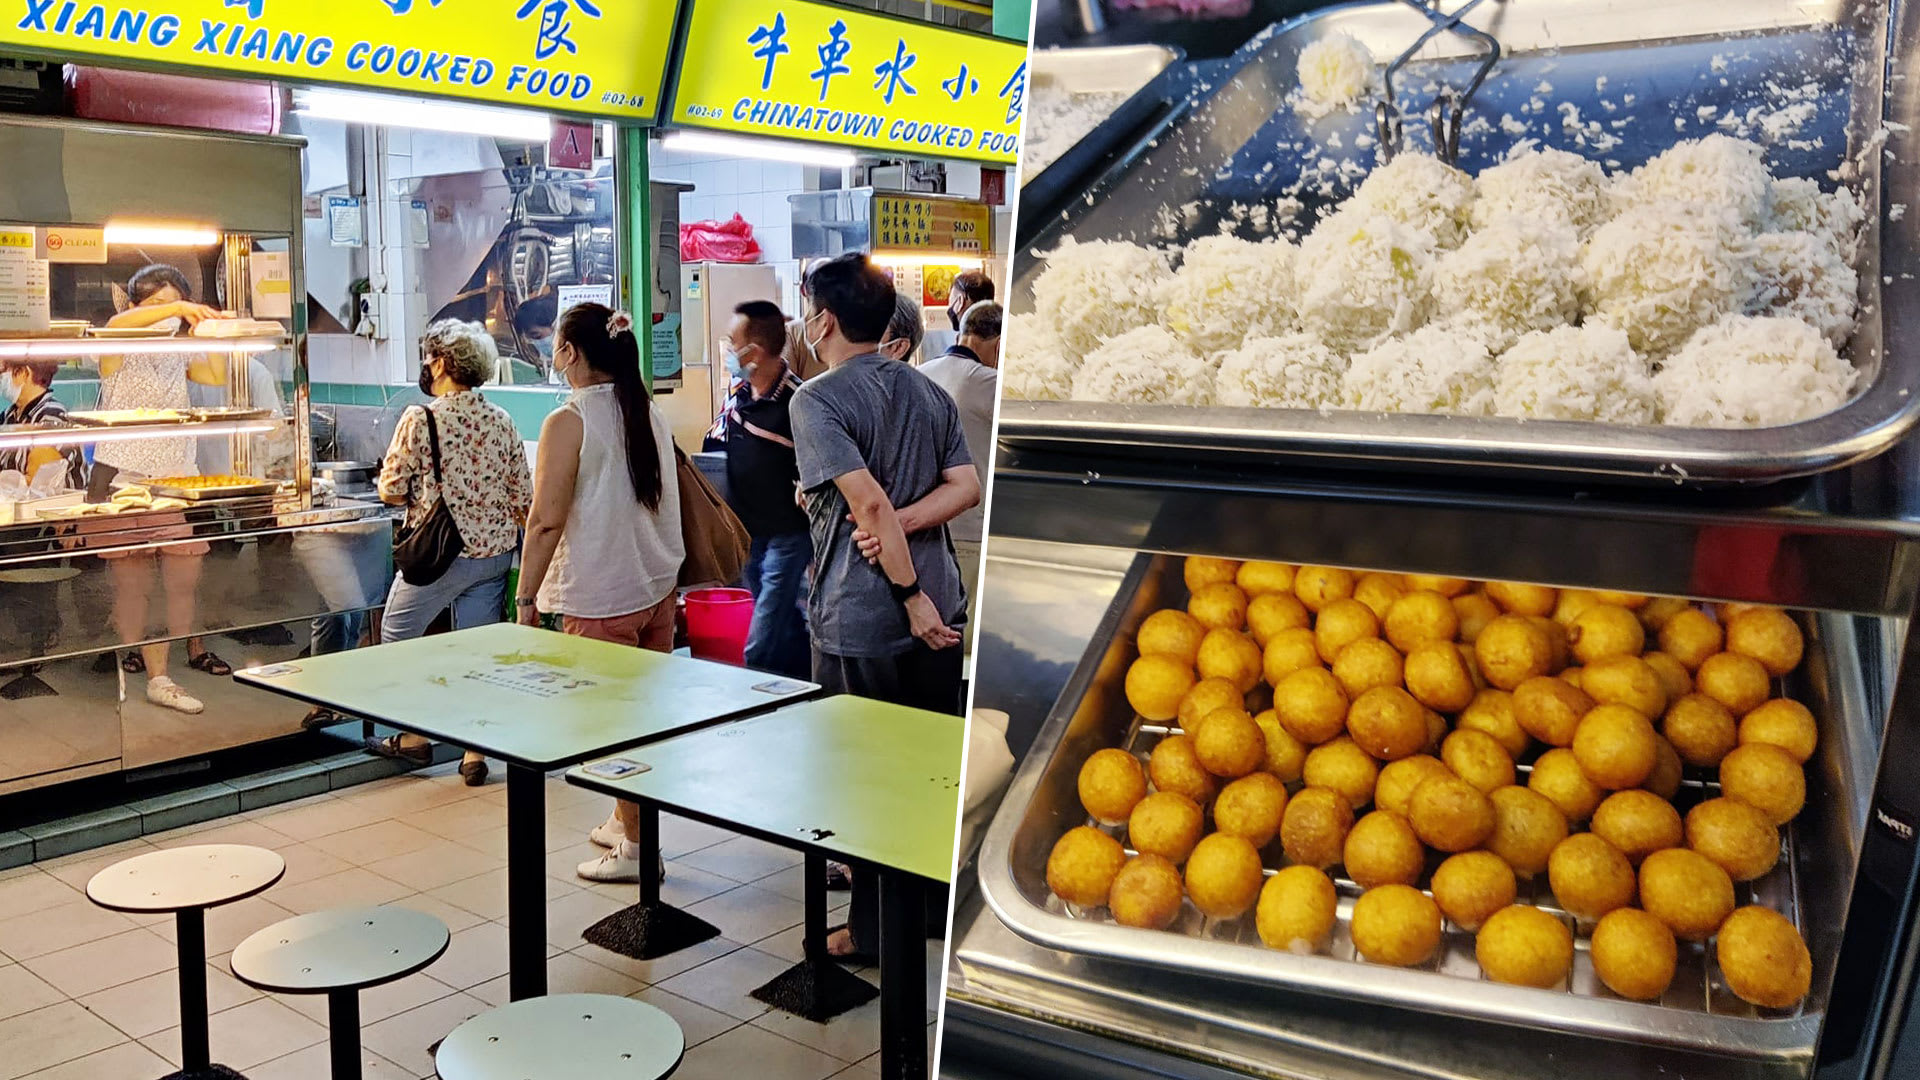 8 For $1 Sweet Potato Ball Hawker Stall So In Demand, It Sells Out By 9.30am